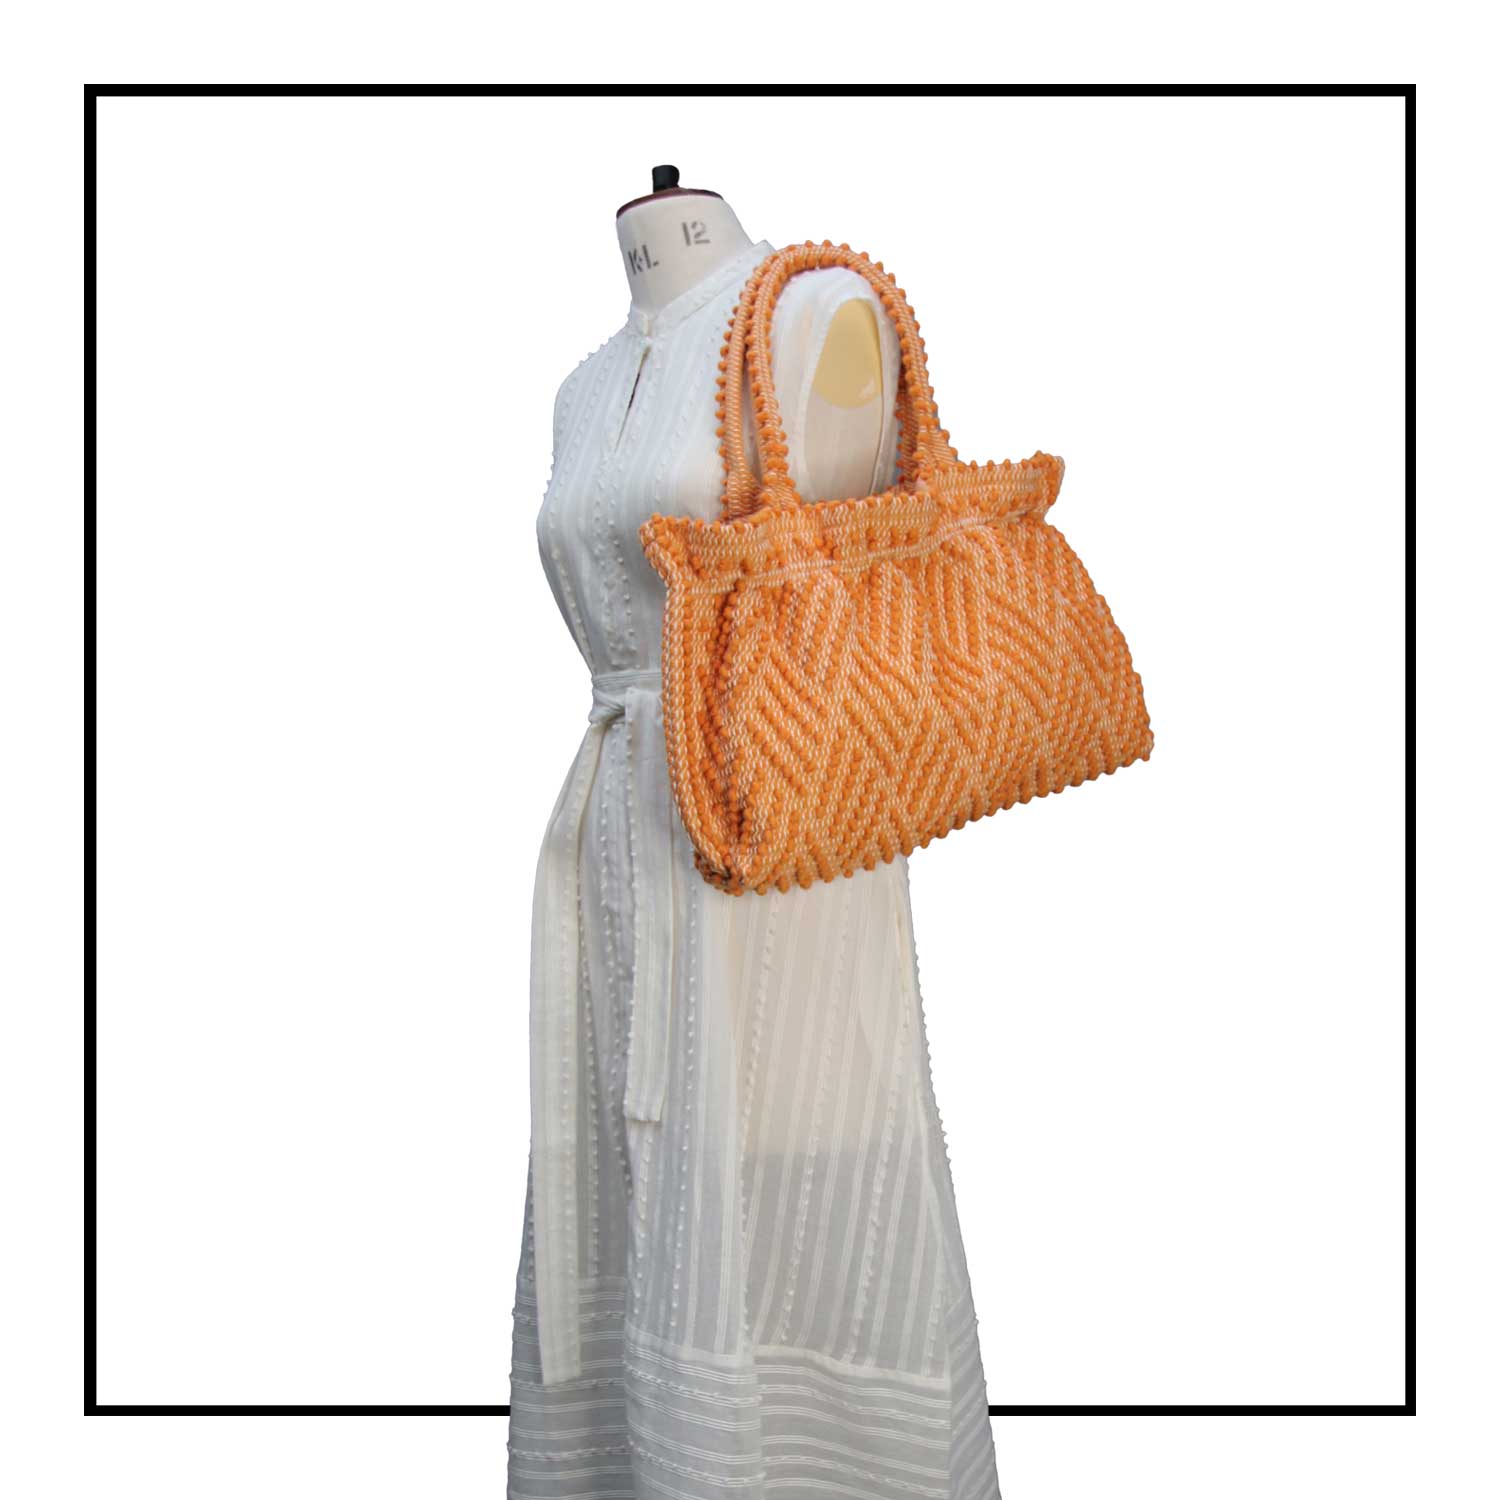 The handbag on a model - Sustainable tote - summer bag - luxury handbag - handwoven black and white tote made in Italy by hand • timeless individualistic fashion • eco-friendly fashion • socially responsible, lasting fashion.